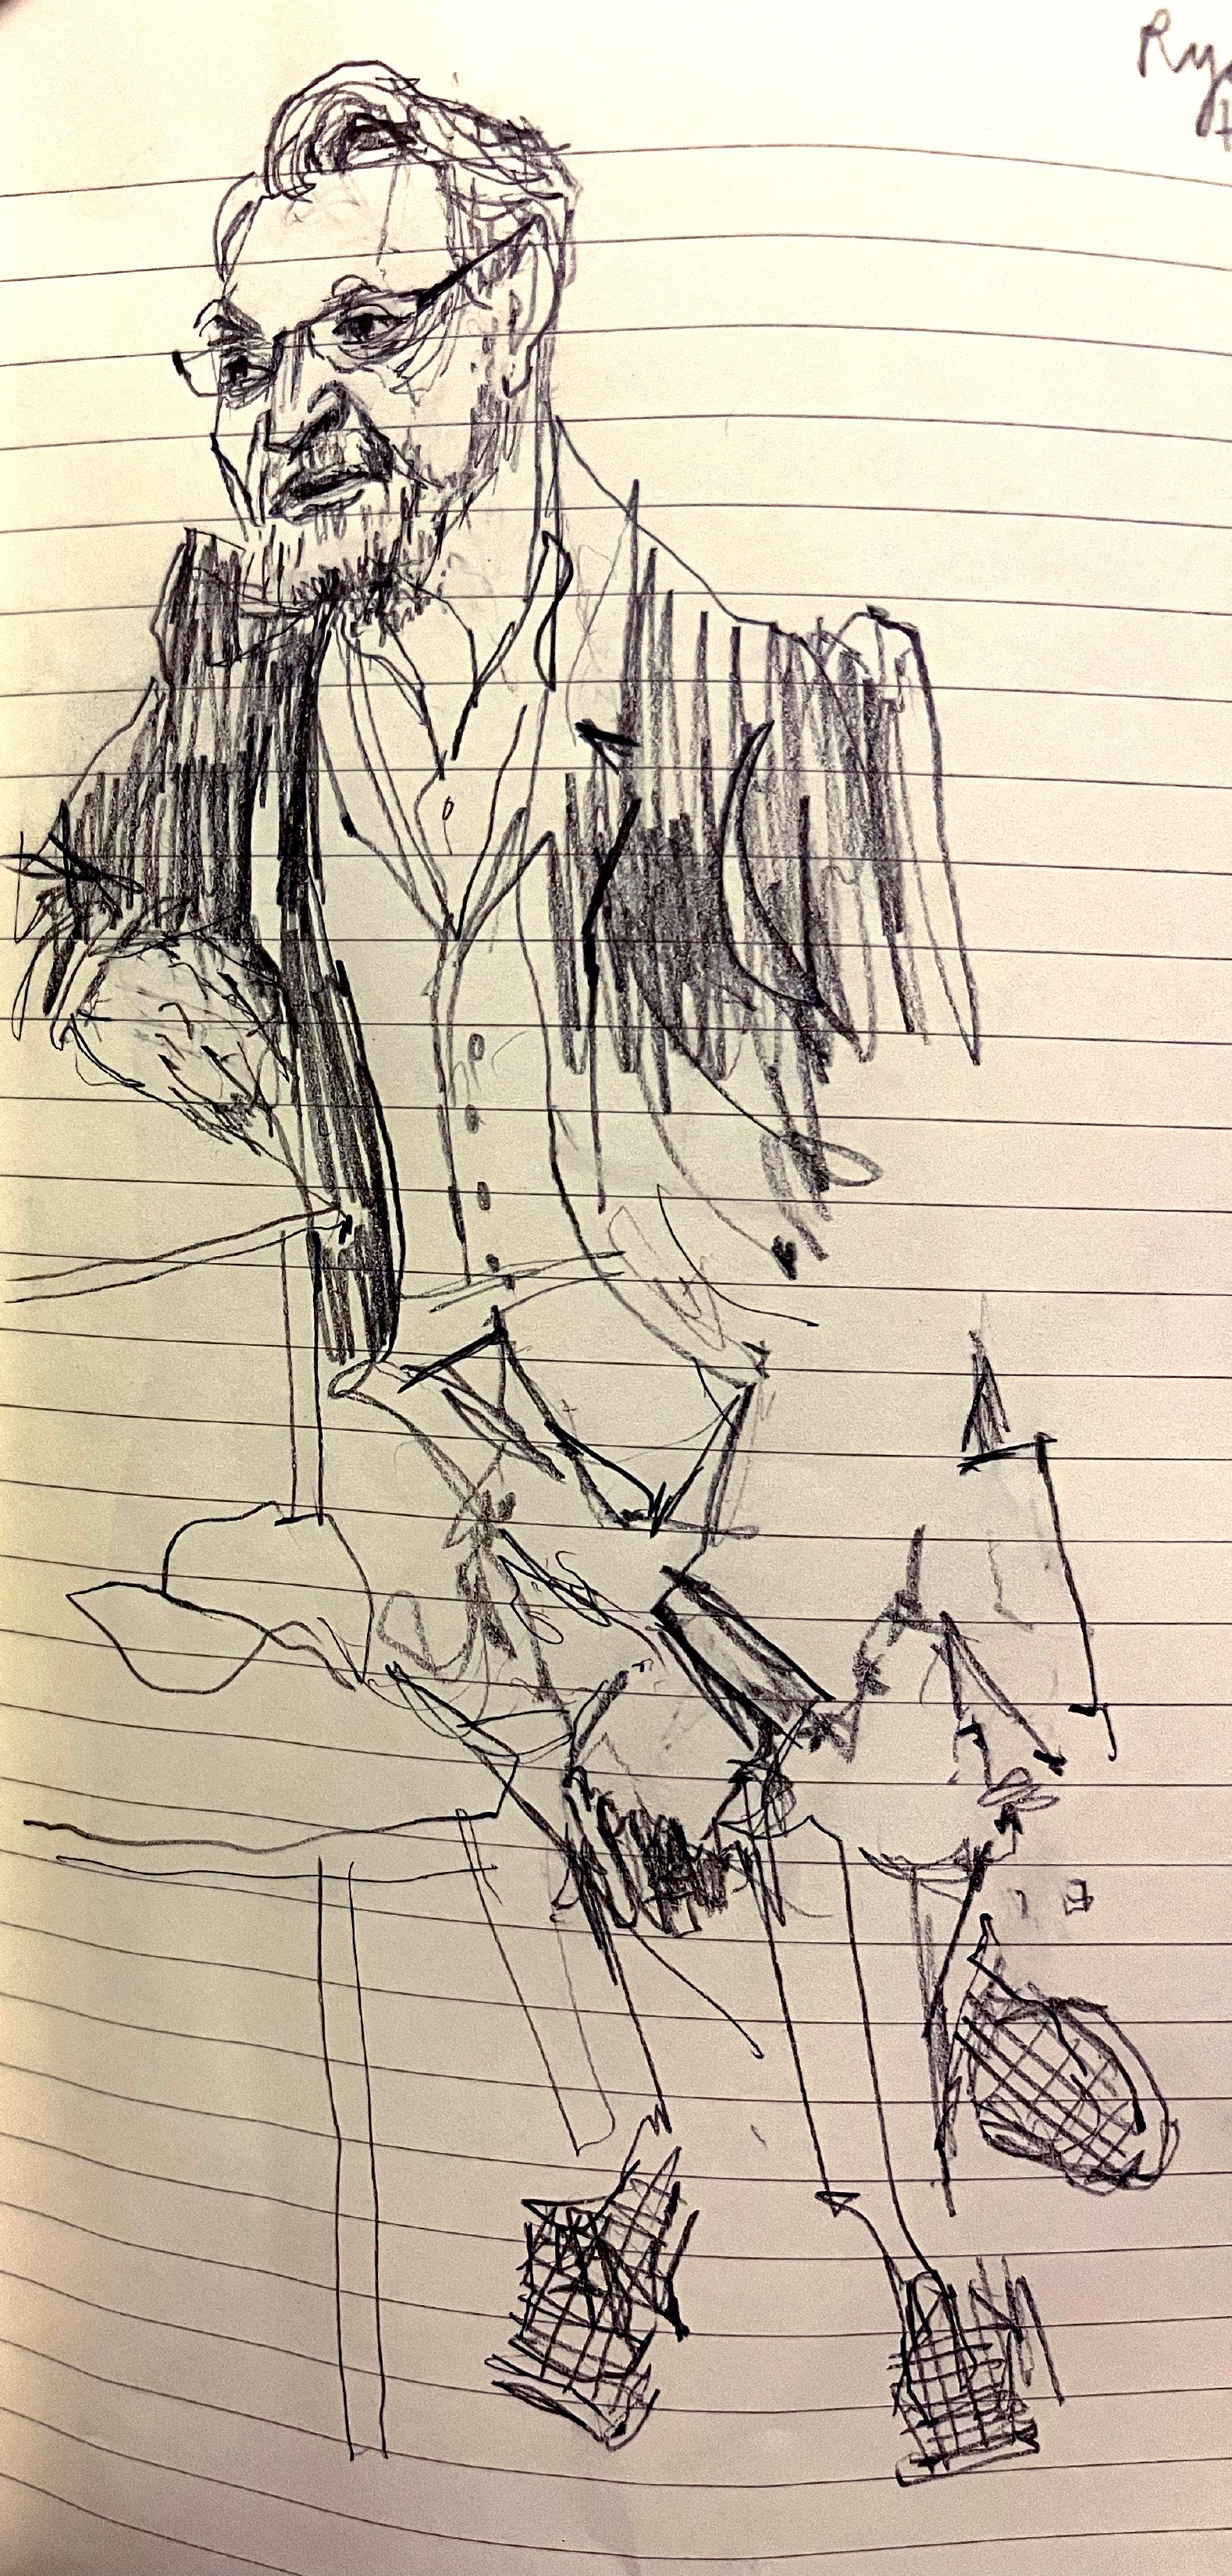  chip Kidd lecture sketch 